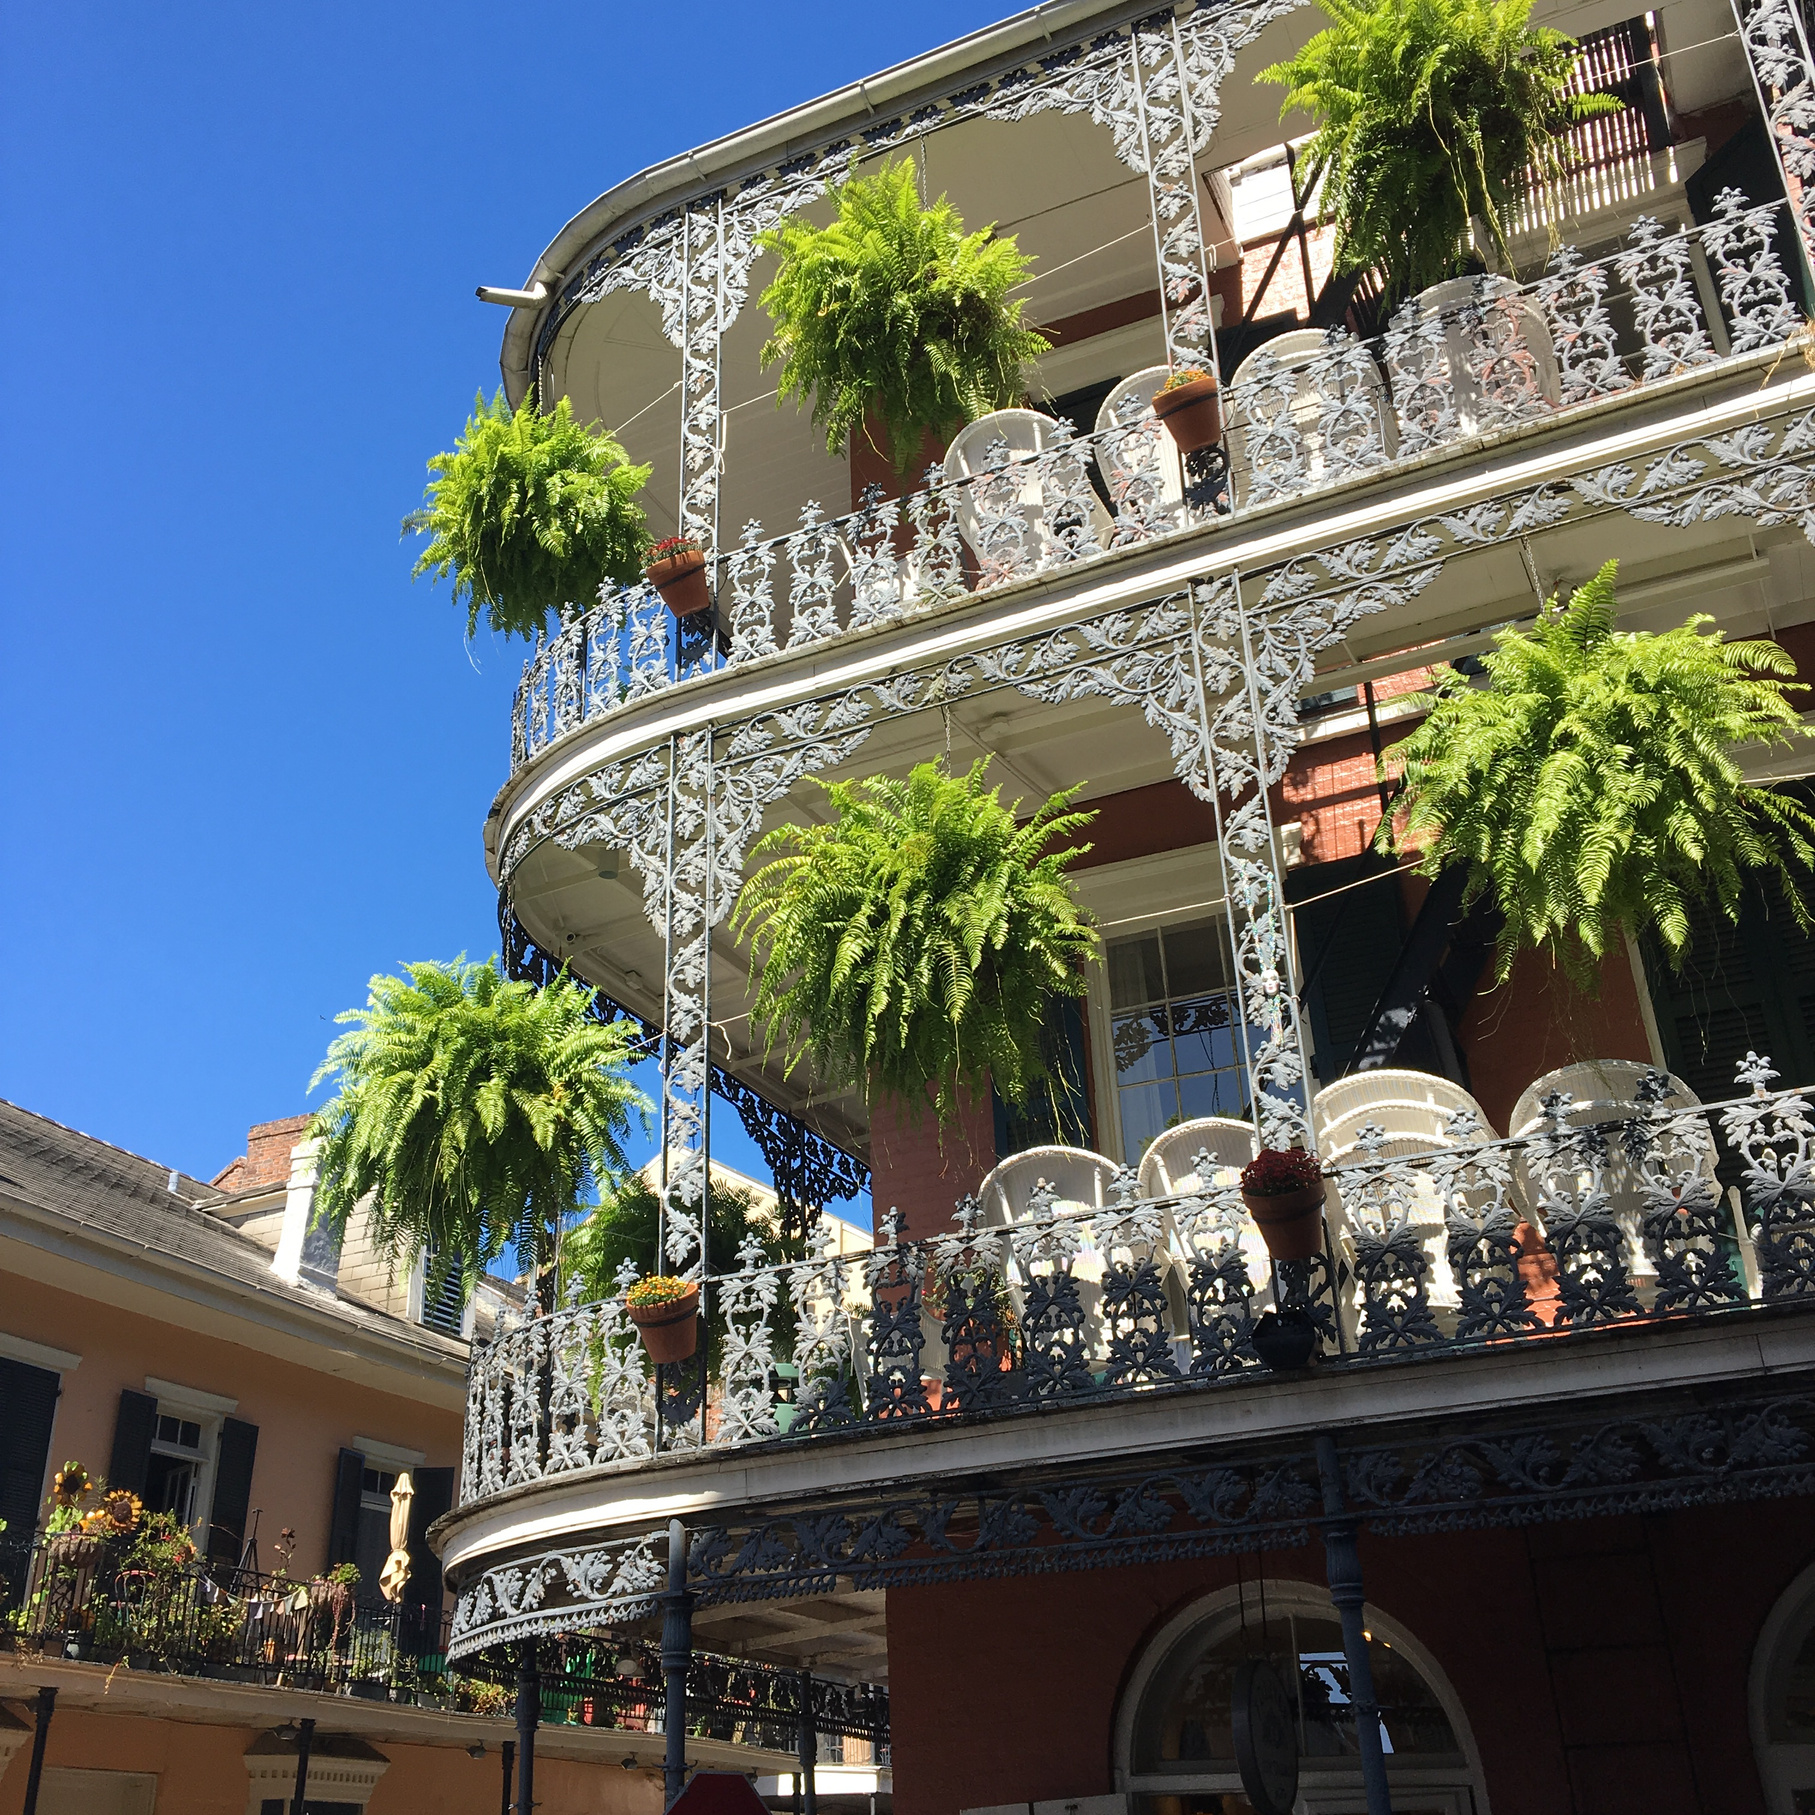 Hanging gardens of New Orleans